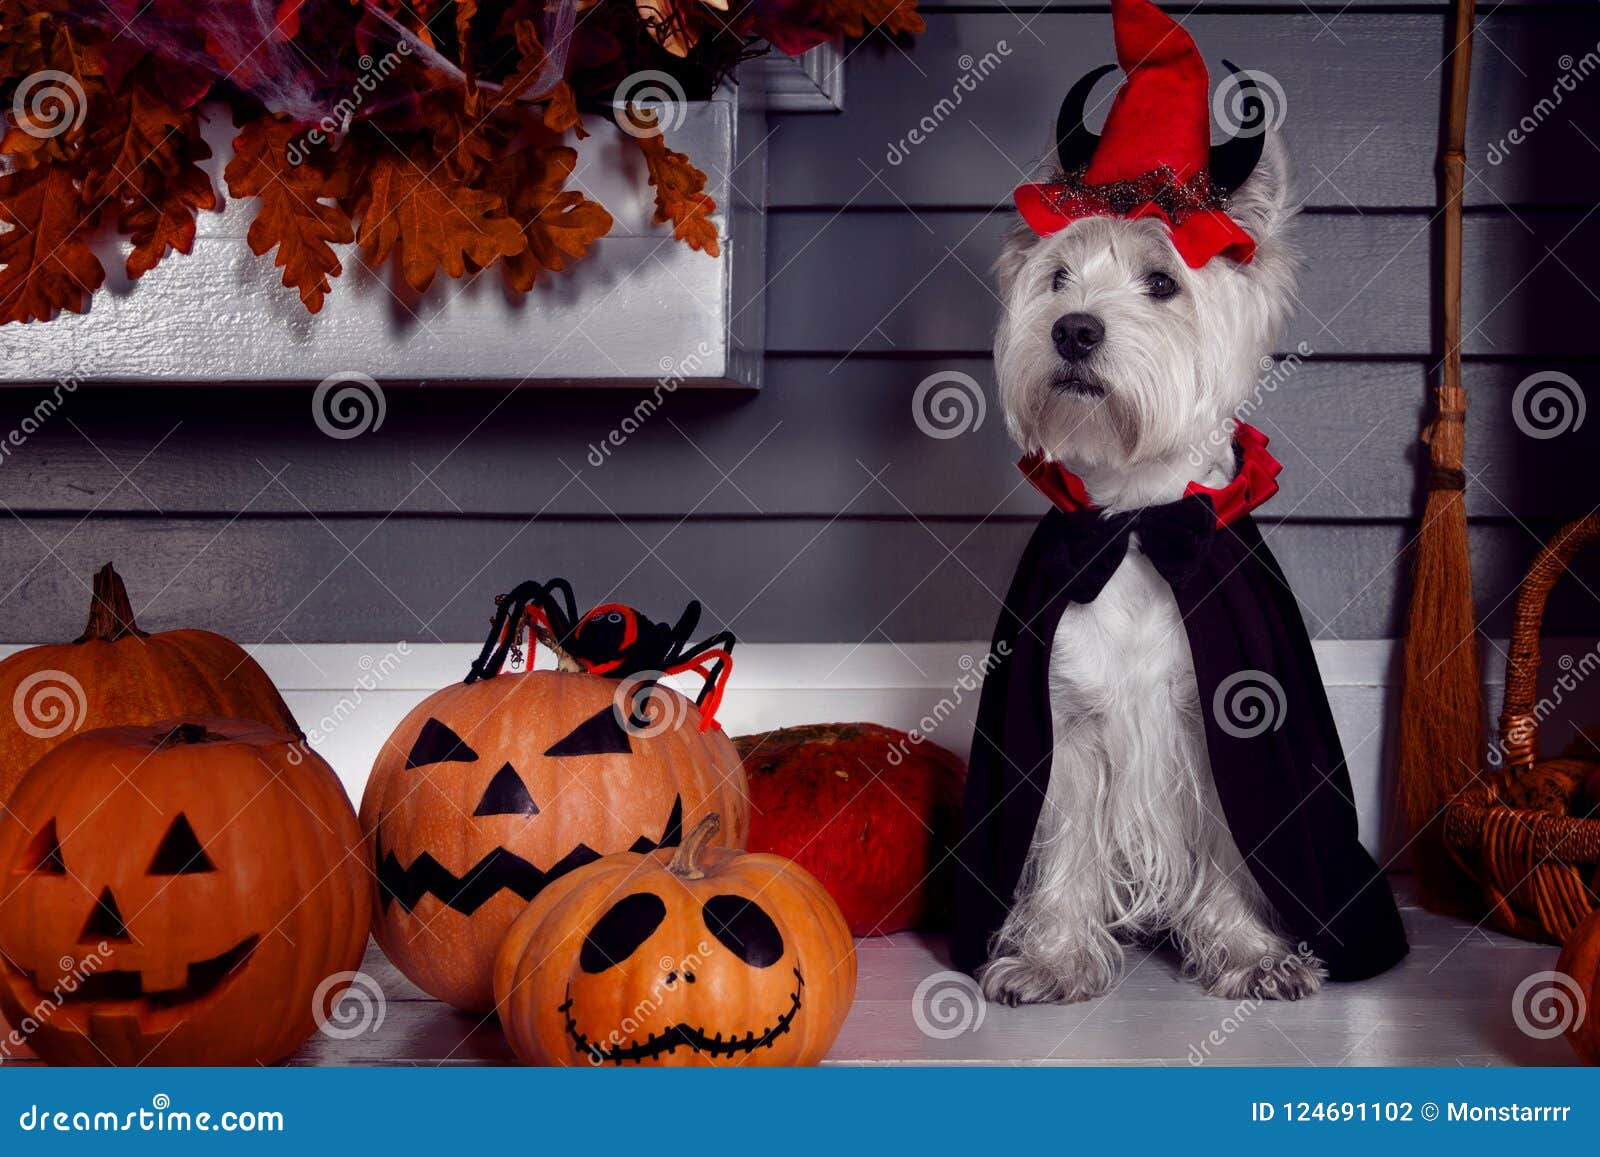 Funny Dog In Halloween Costume And Pumkins Stock Photo Image Of